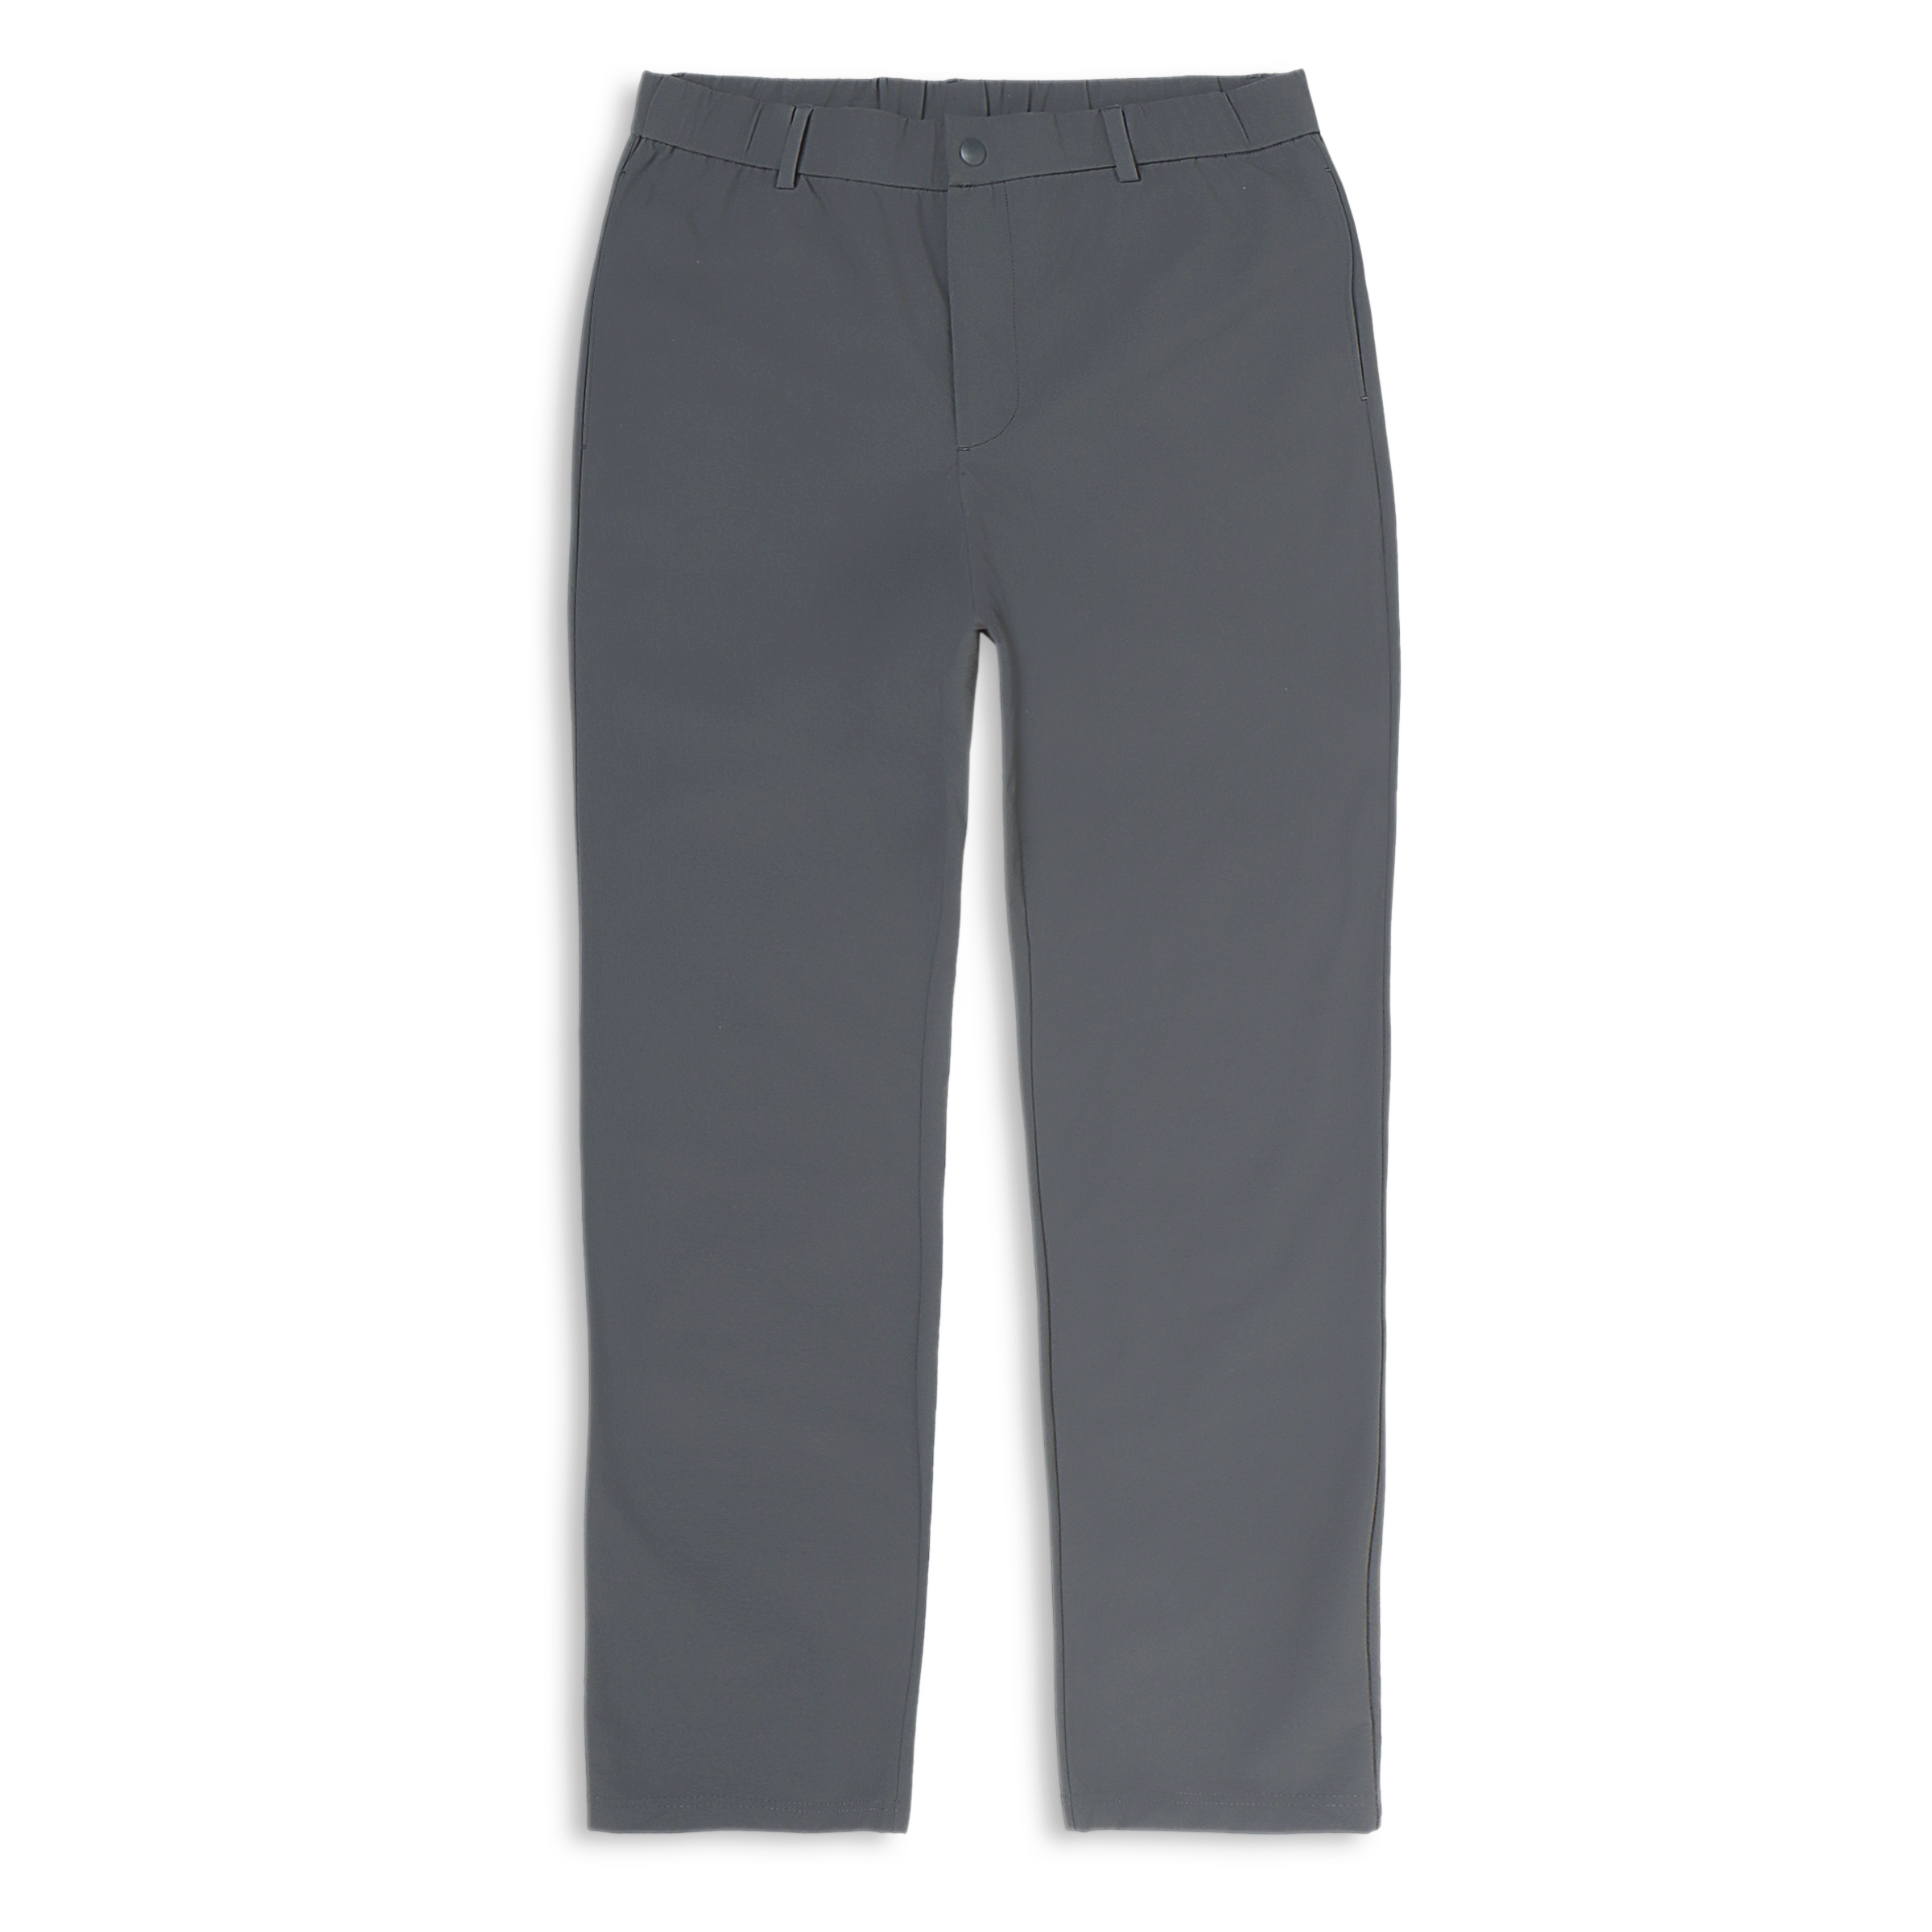 Tour Pant 30" Dark Grey with flat elastic waistband, belt loops, snap-button, zipper fly, and two front seam pockets